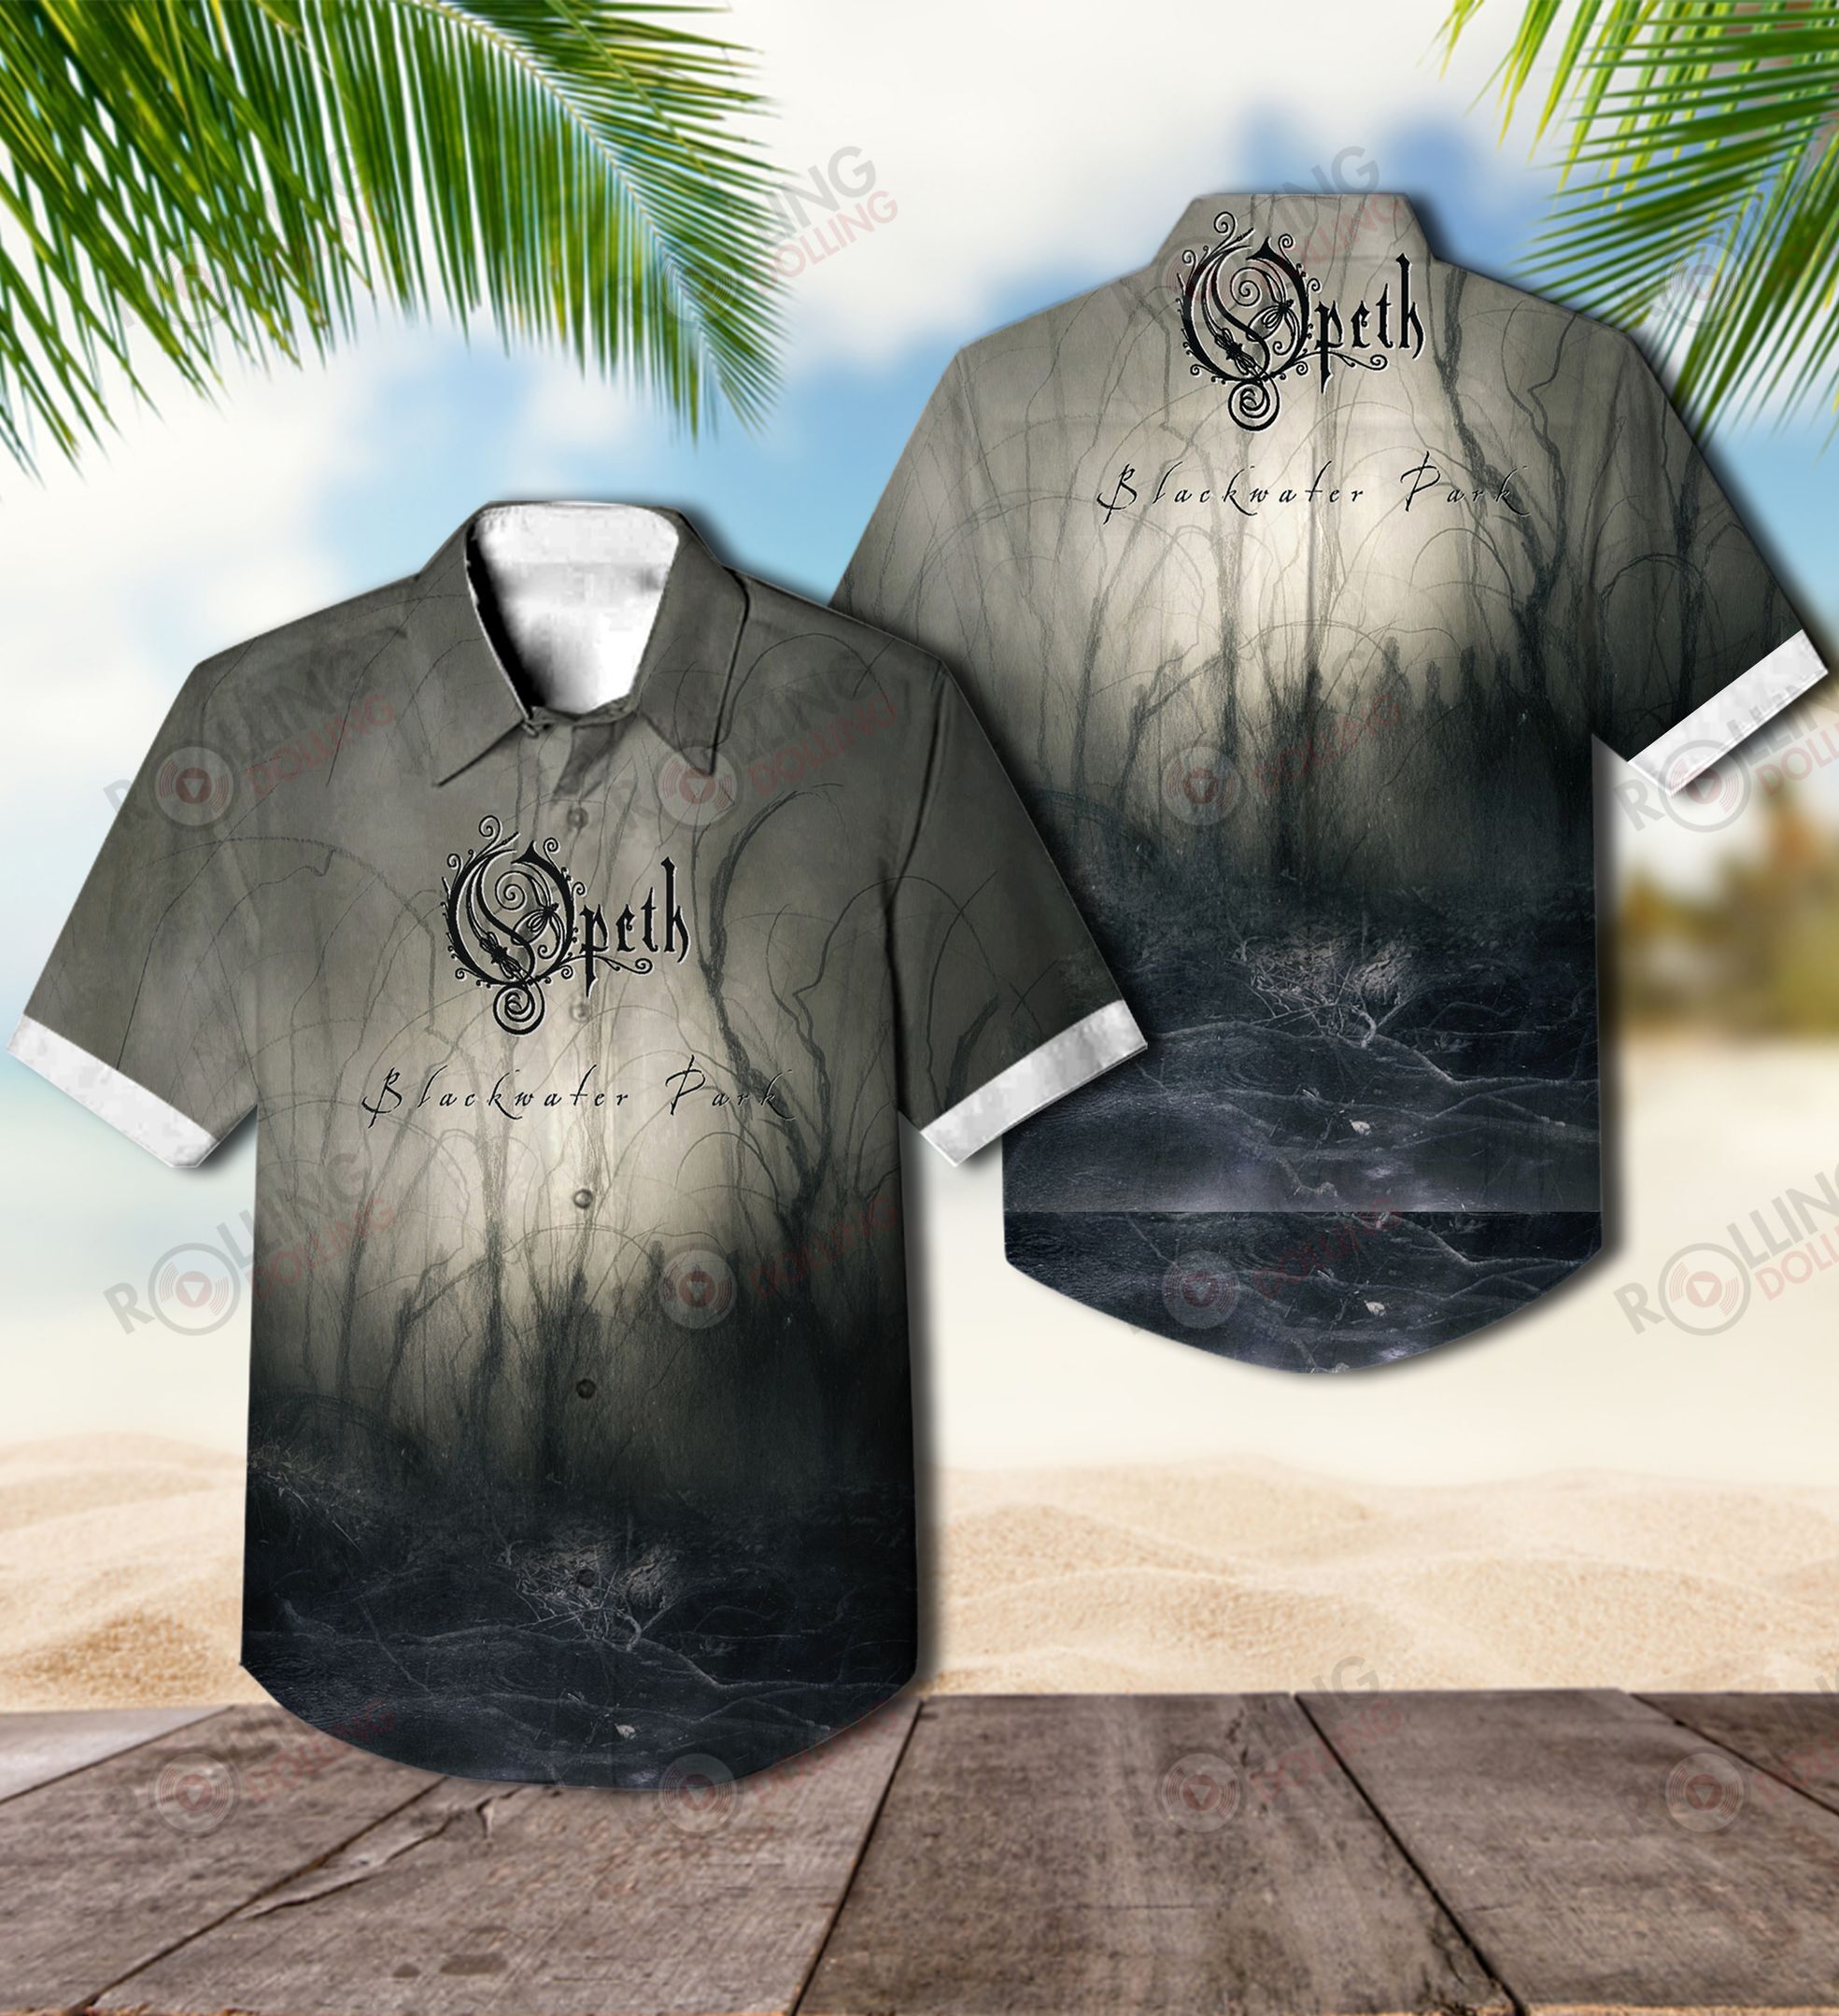 The Hawaiian Shirt is a popular shirt that is worn by Rock band fans 21